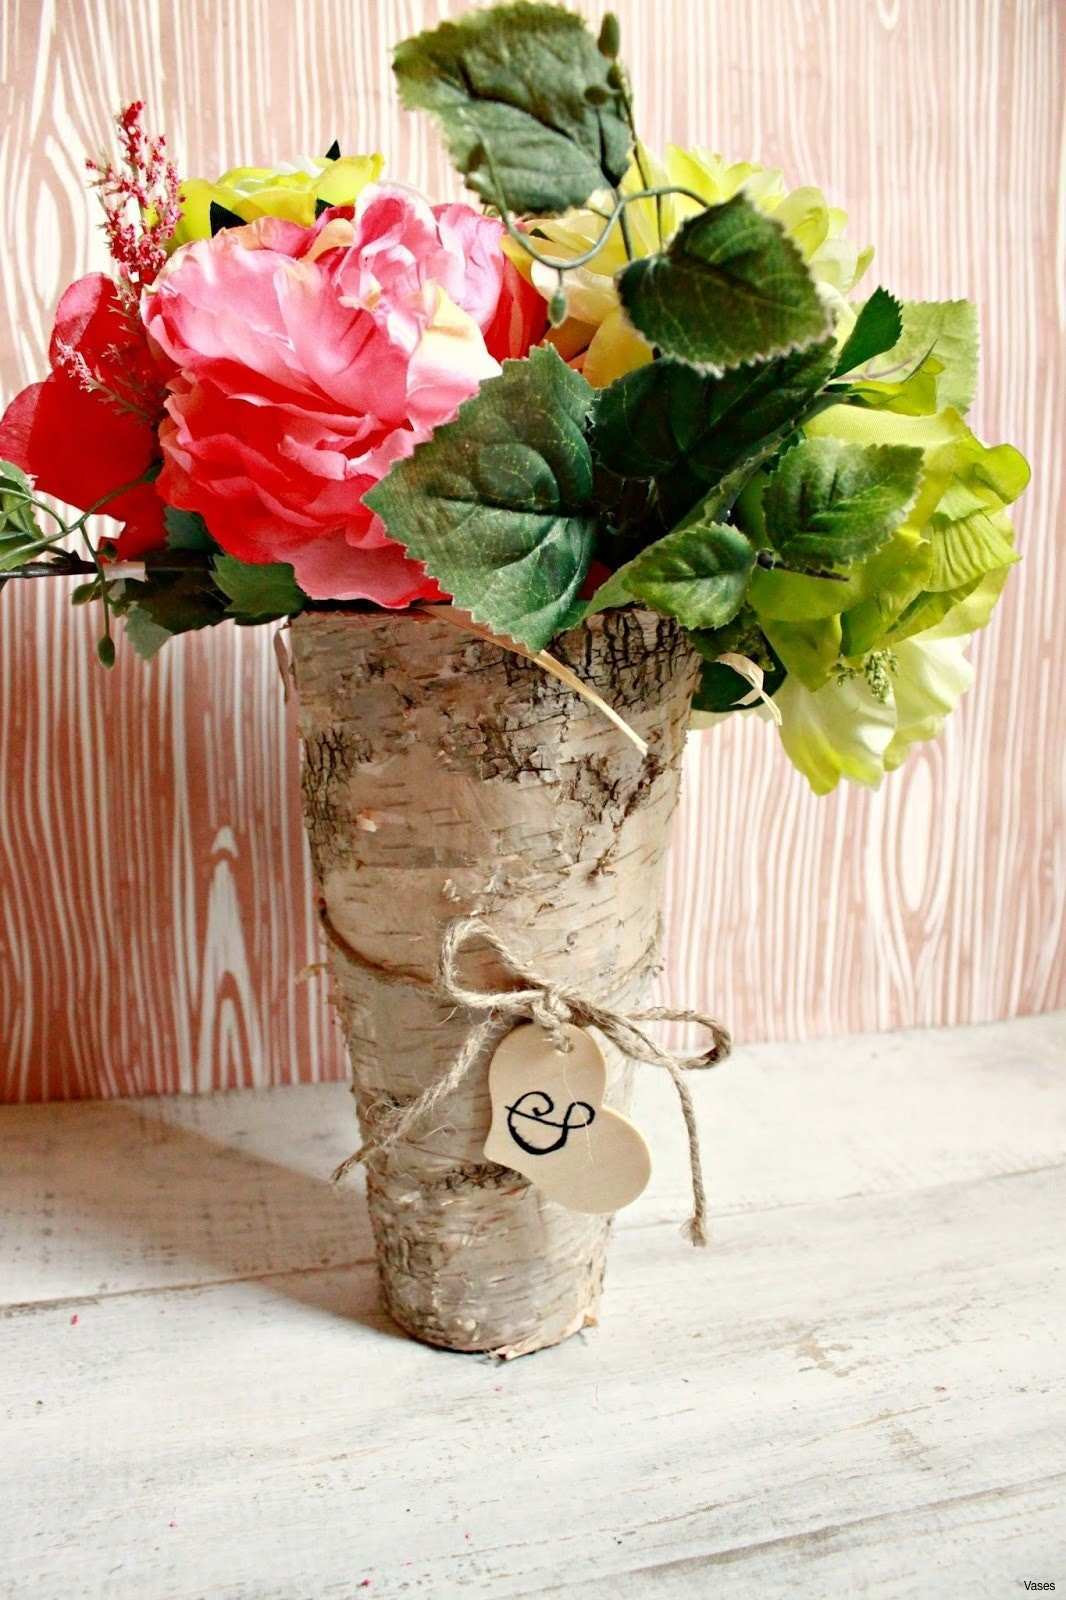 floor standing vases of build a planter box for vegetables luxury wooden wedding flowers h within build a planter box for vegetables luxury wooden wedding flowers h vases diy wood vase i